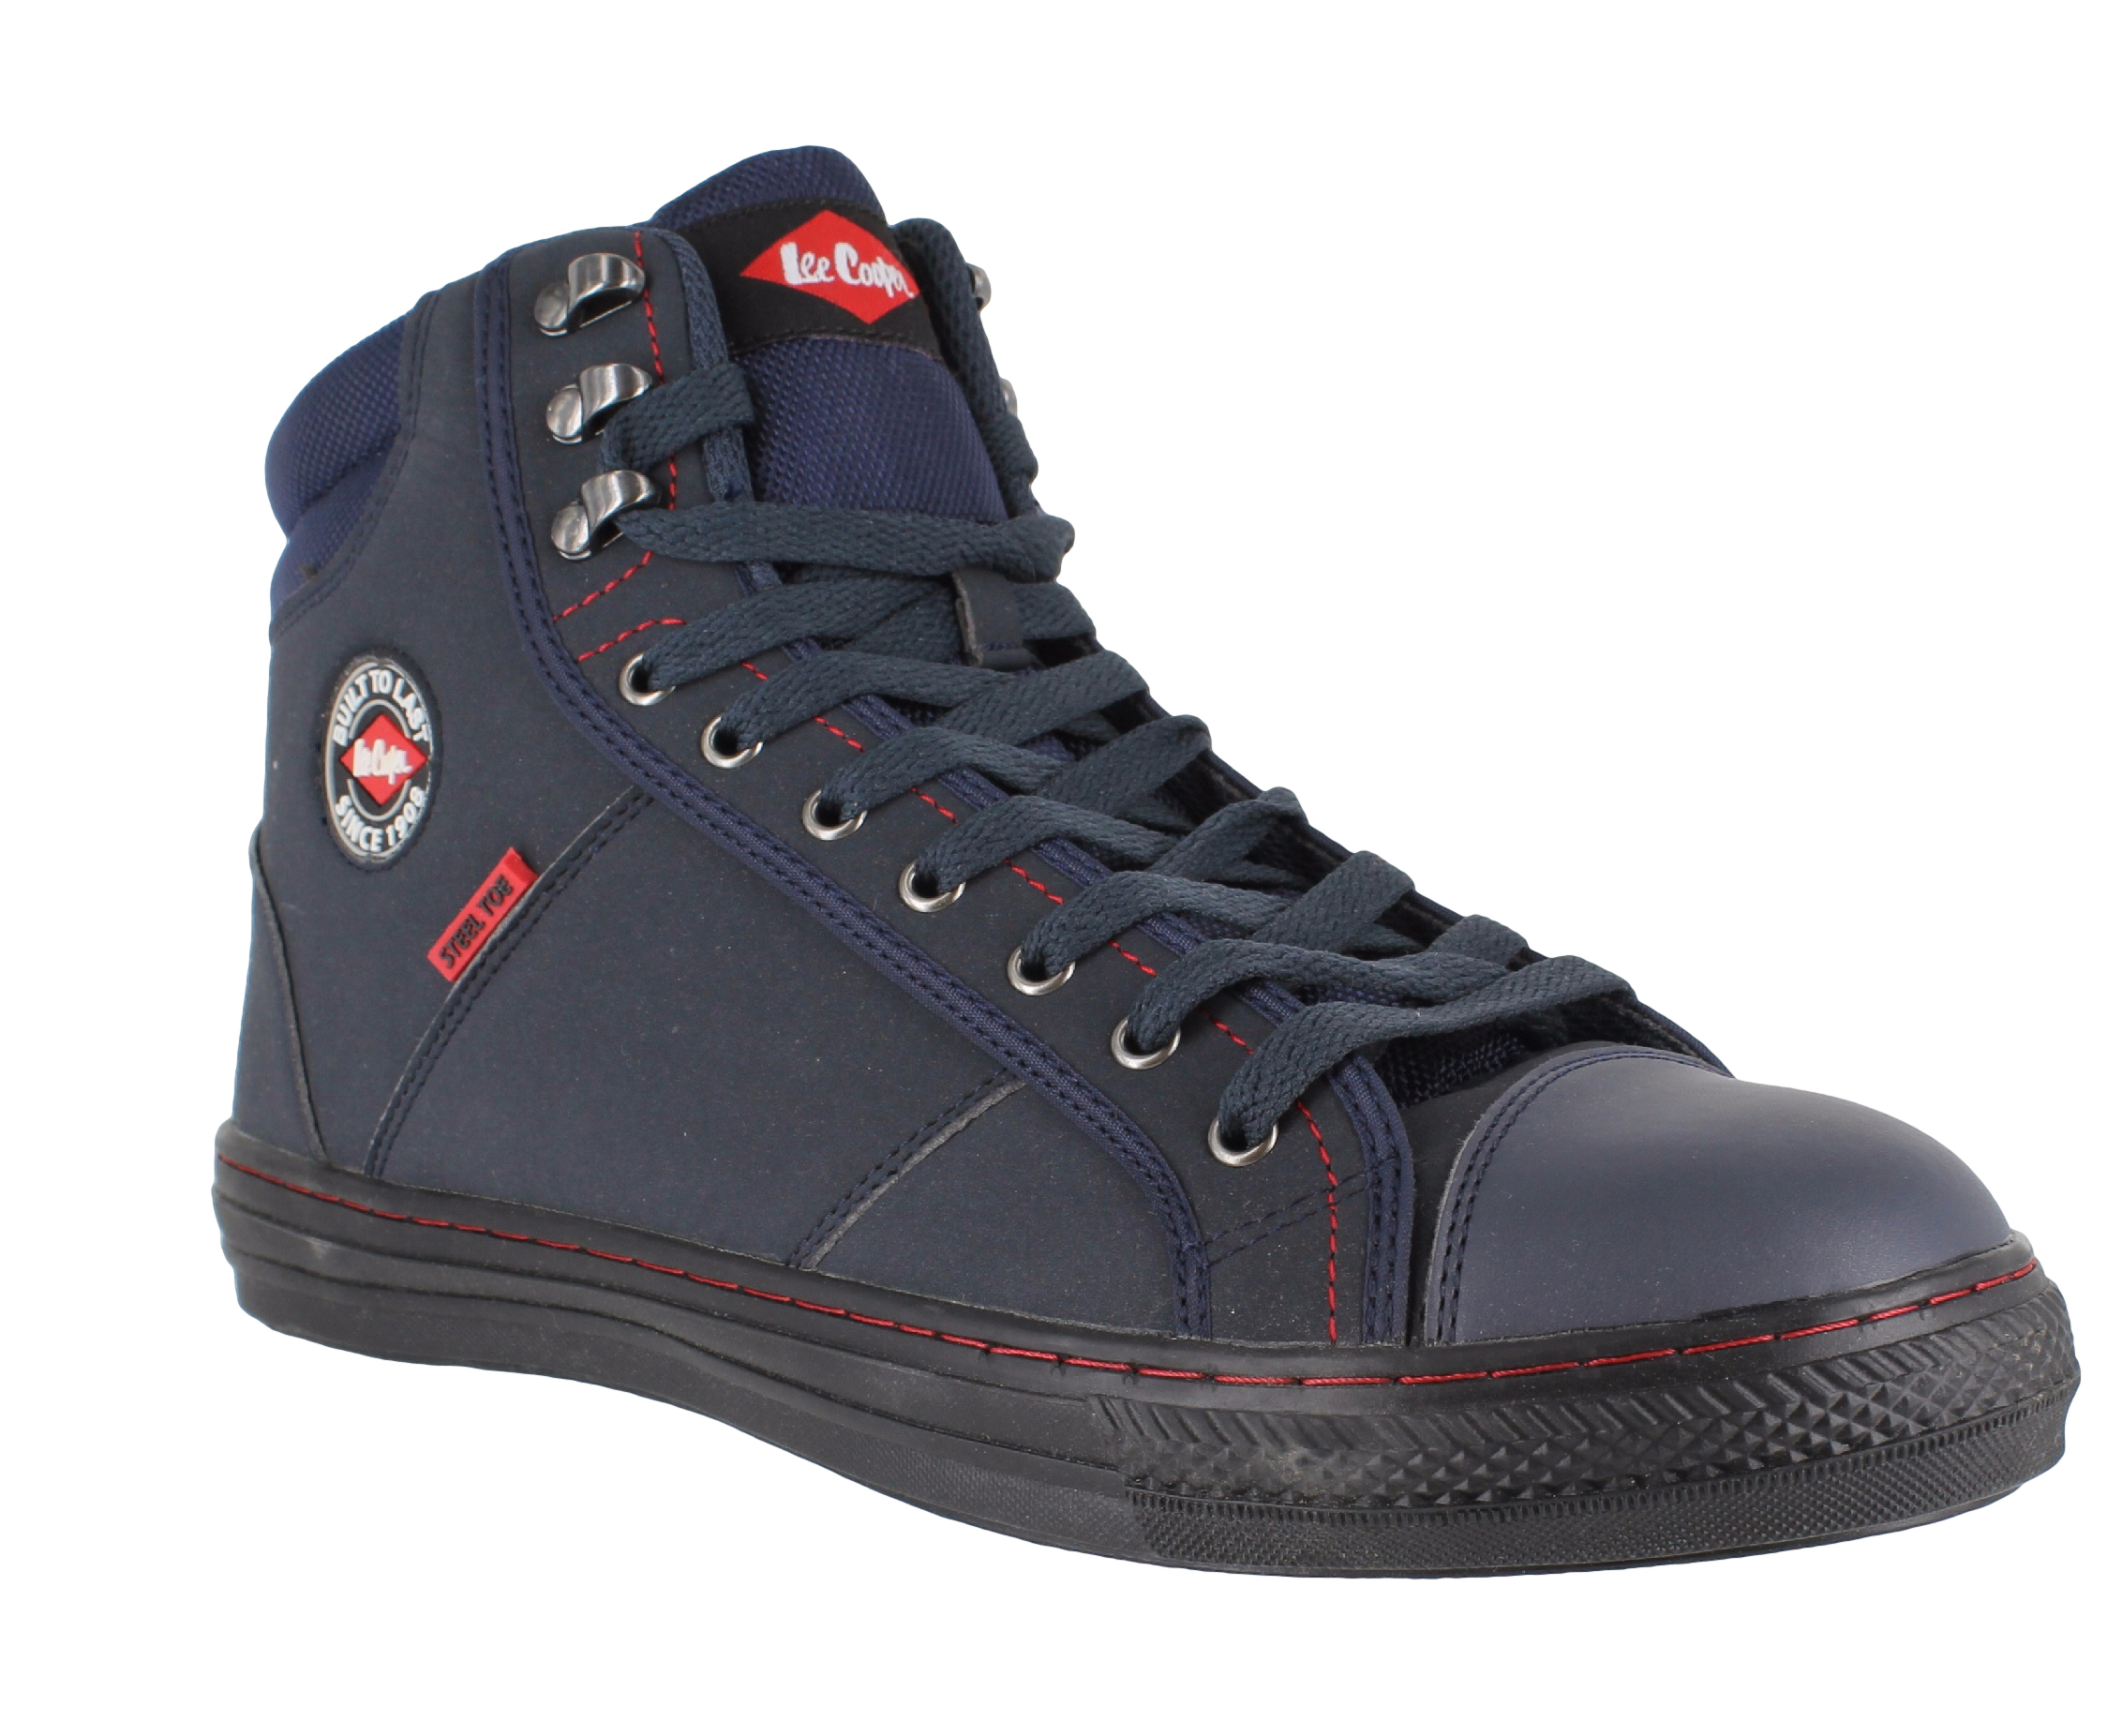 Mens Womens Lee Cooper Steel Toe SB Safety Baseball Boots High Top ...